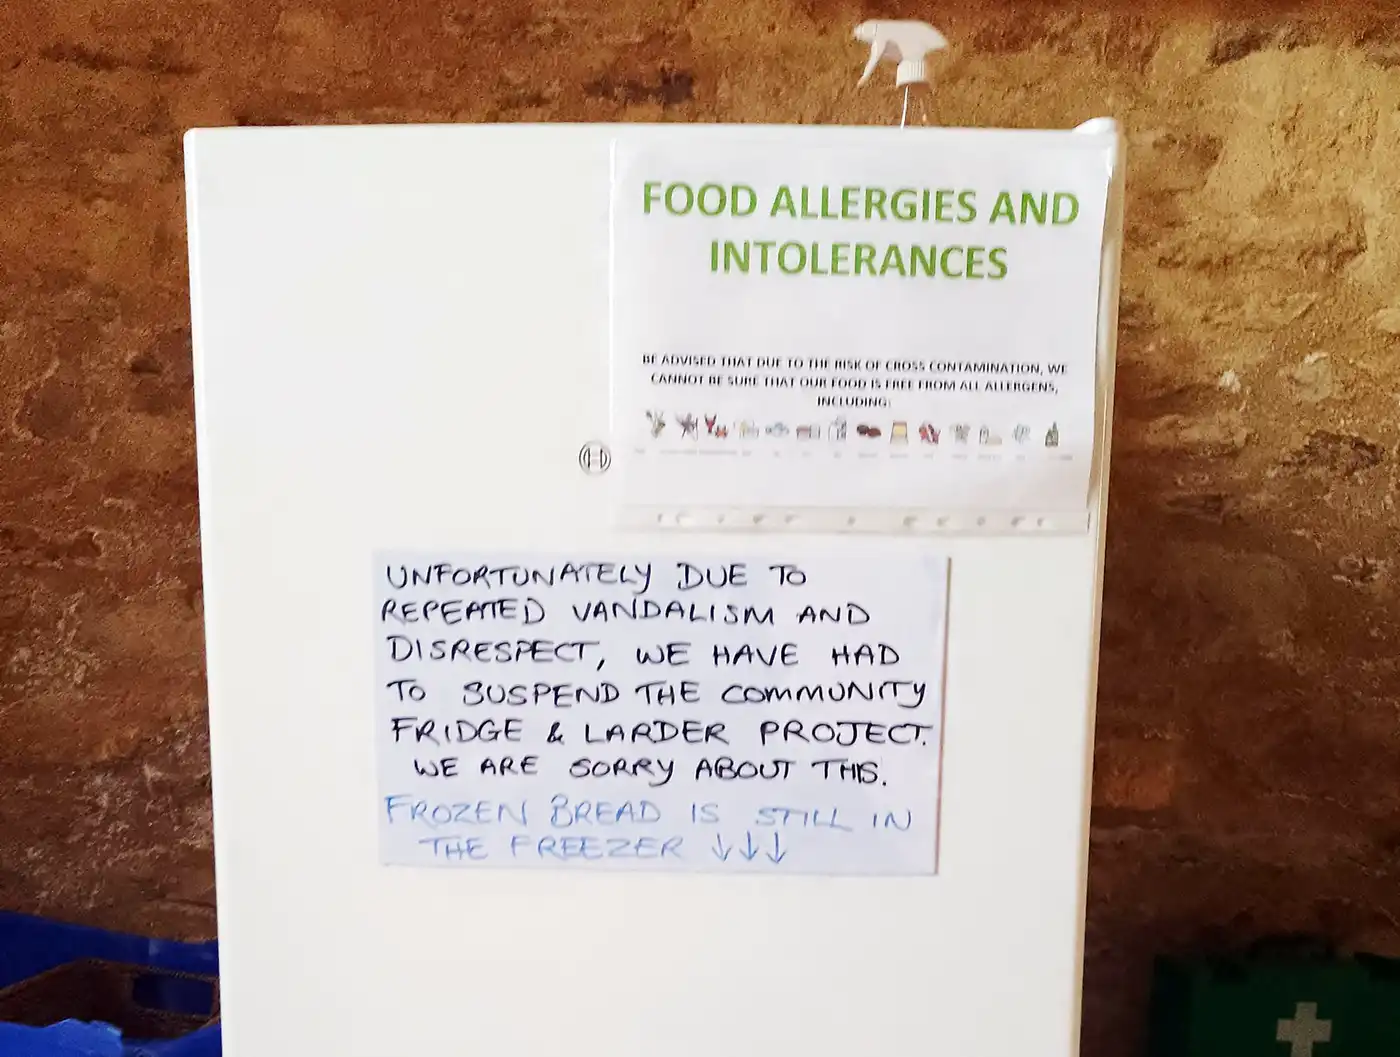 A notice informing people of the decision to close the community fridge and larder in Henstridge